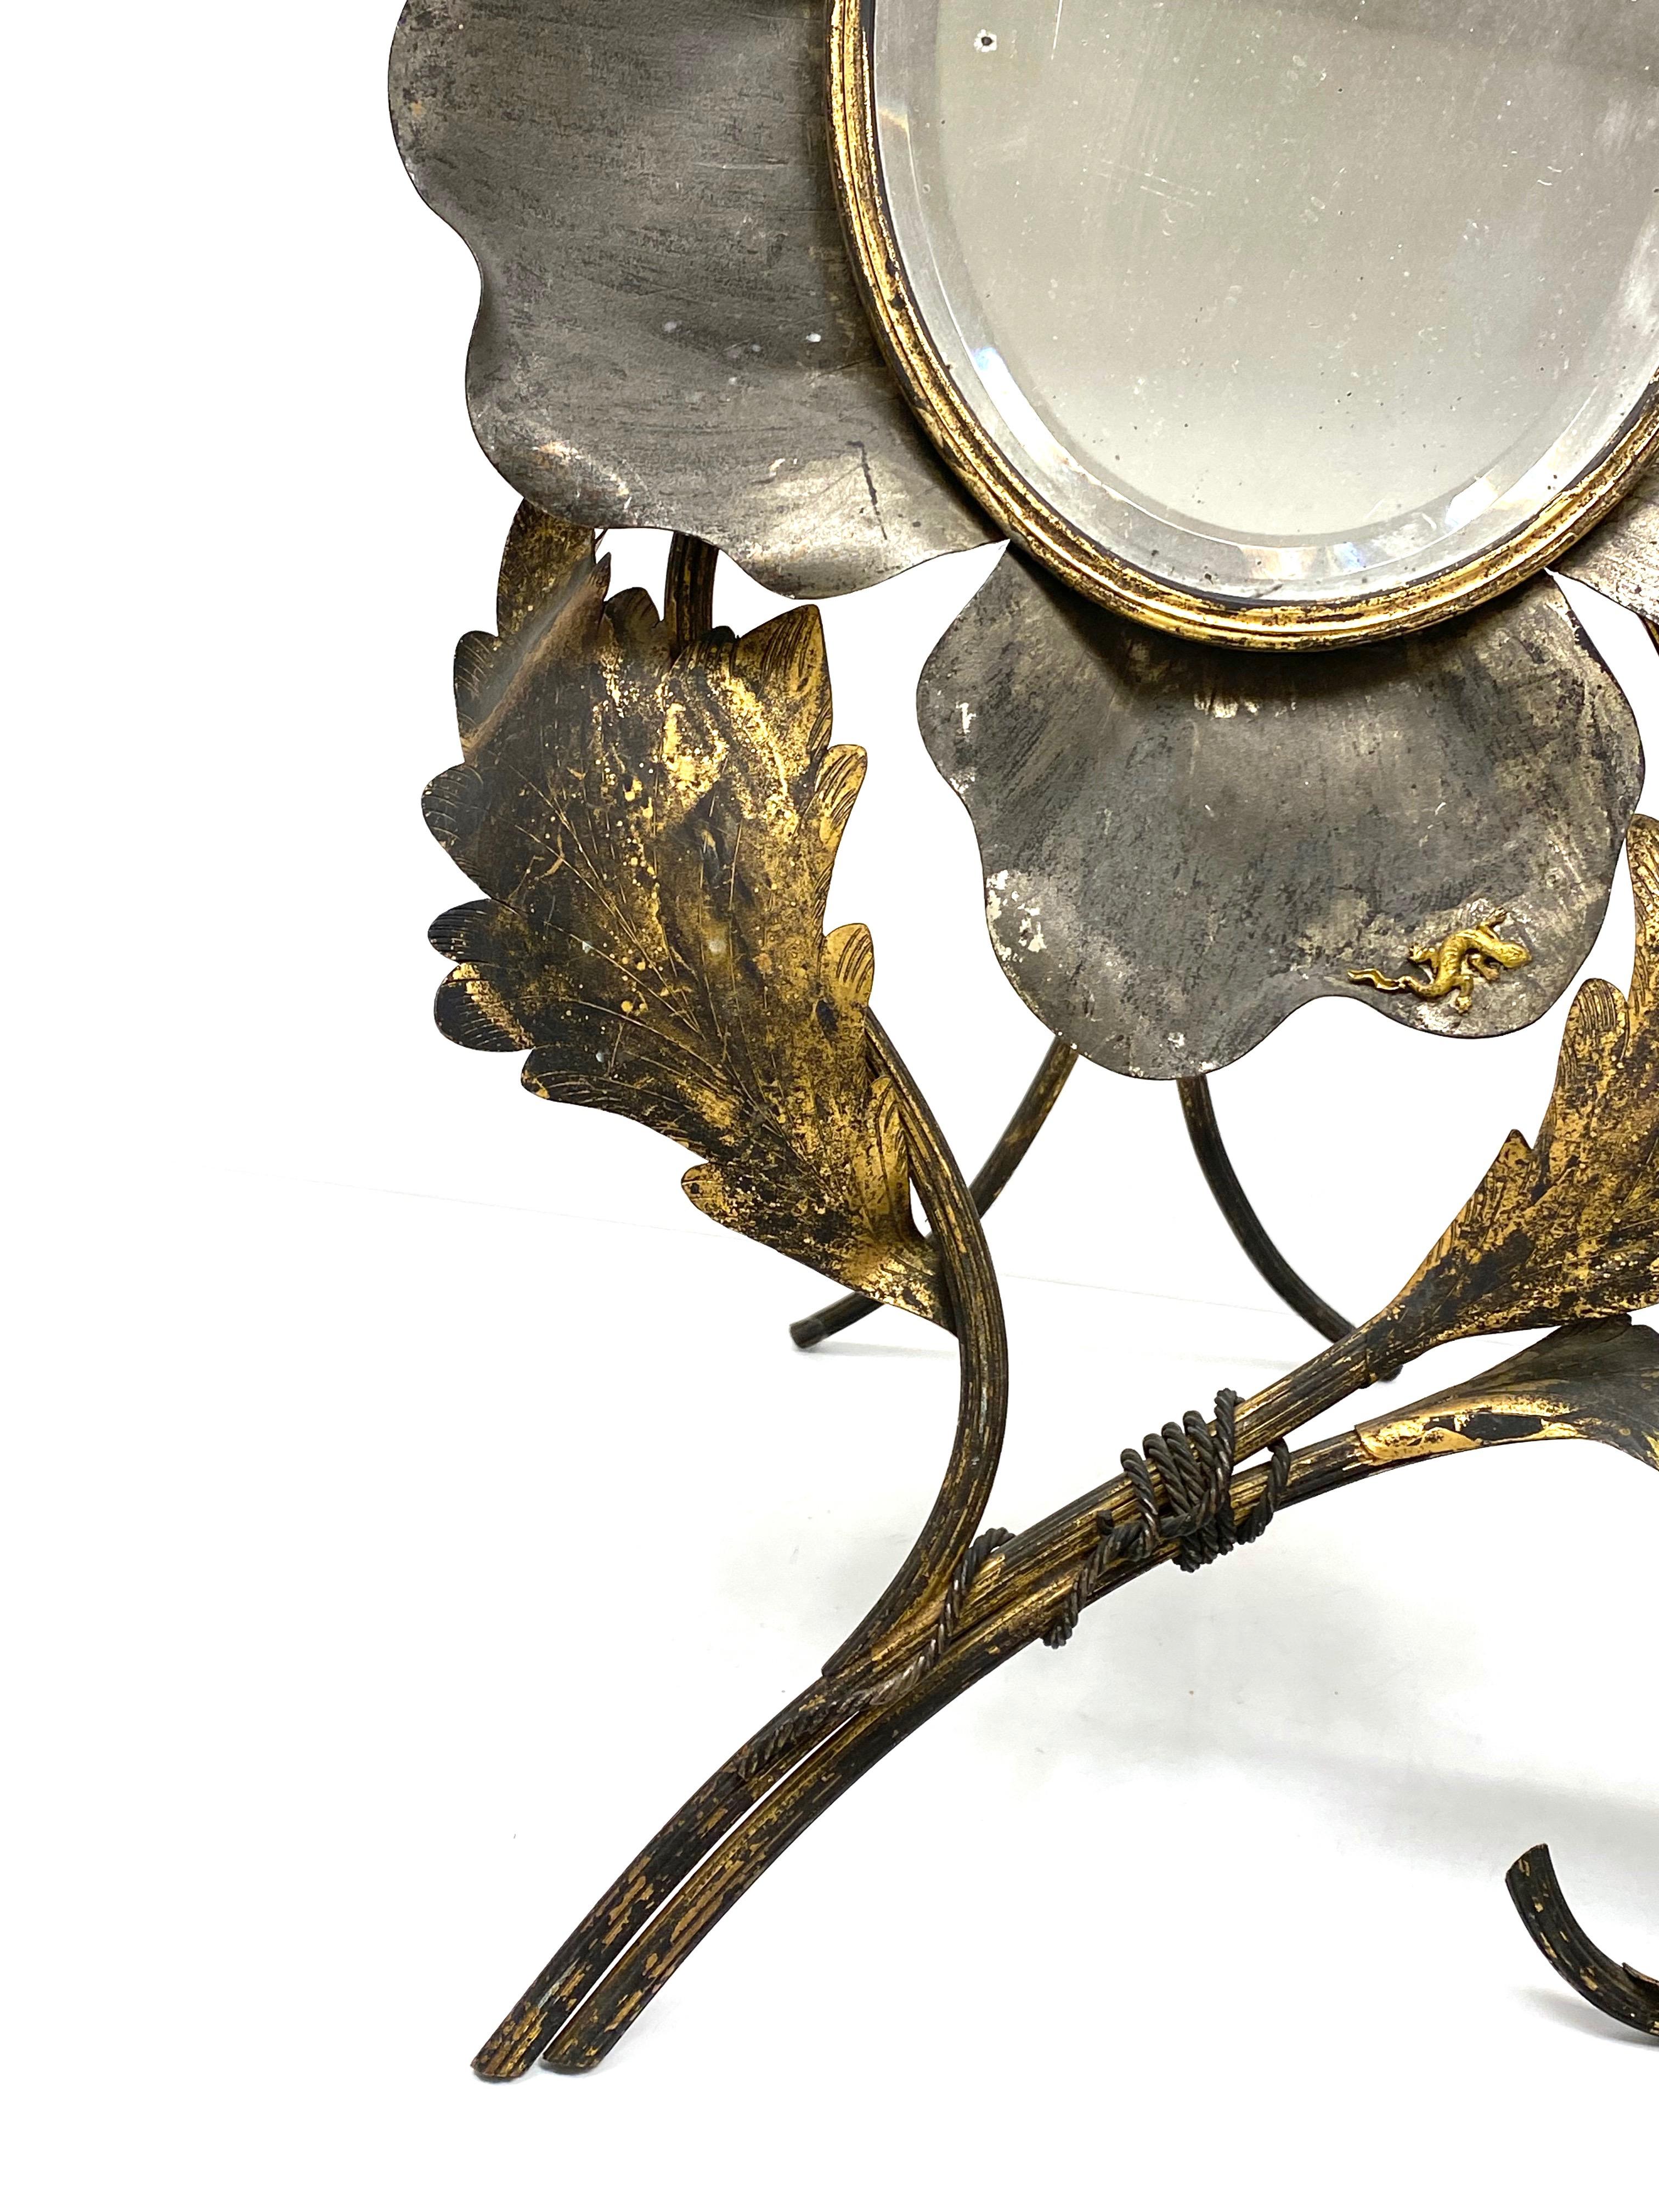 A gorgeous distressed glass vanity mirror made of Metal. With signs of wear as expected with age and use. Can be used as standing or wall mirror. Lost some of the gilt, but this is old-age. Have you seen the small petite little lizard at one of the